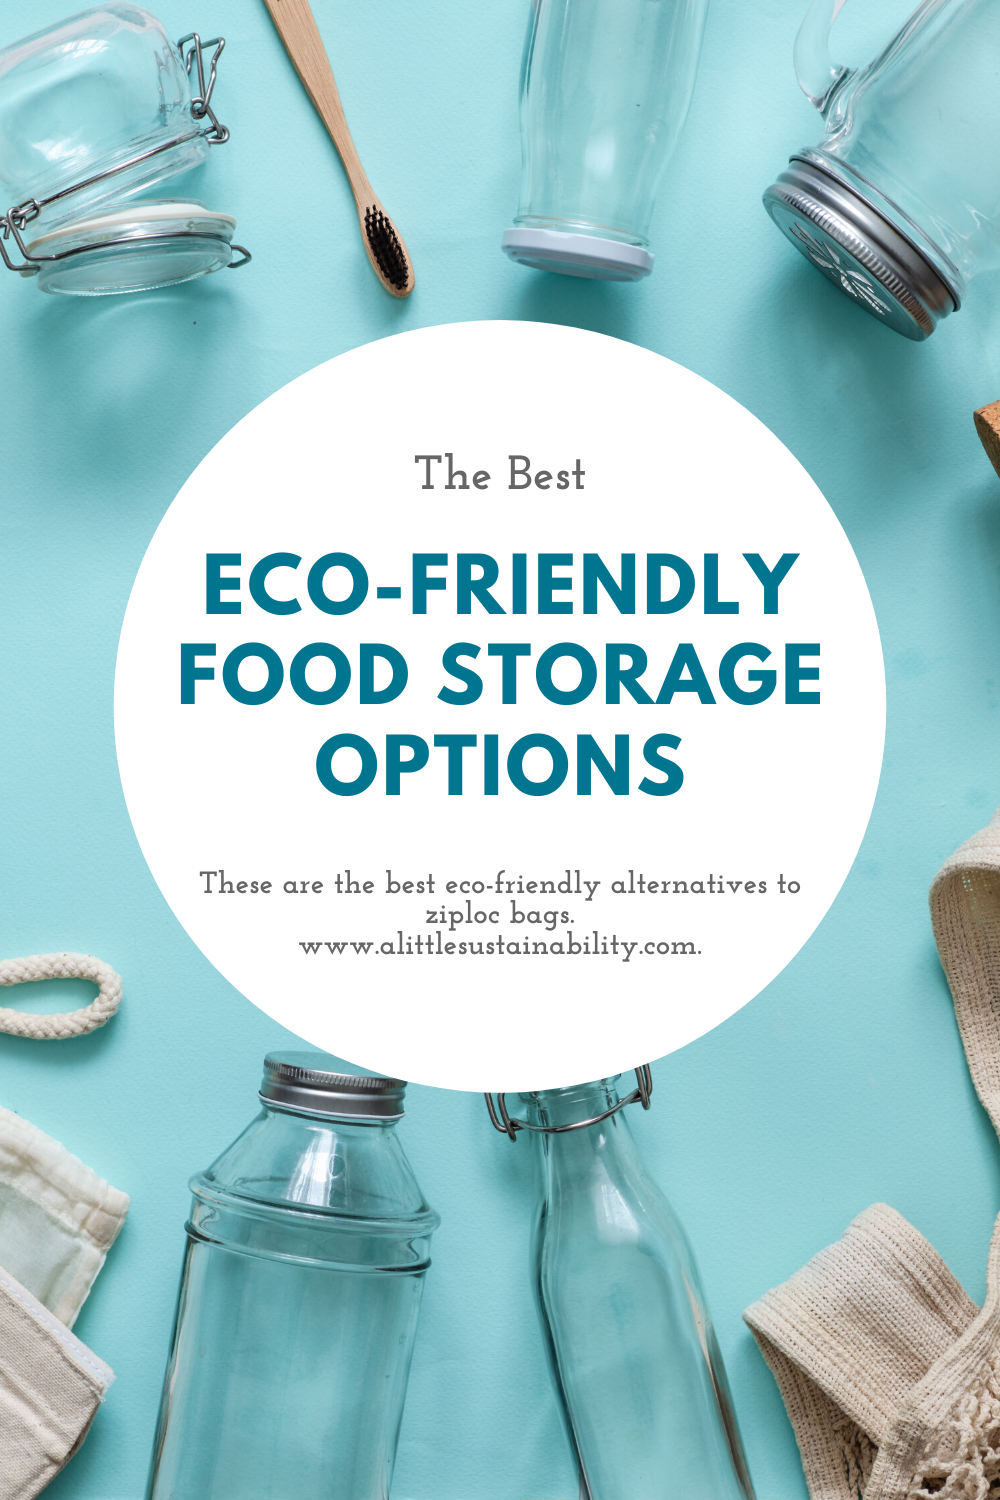 These are the best eco-friendly alternatives to ziploc bags. We have 5 alternatives to ziplocs that will help you on your journey to zero waste living.